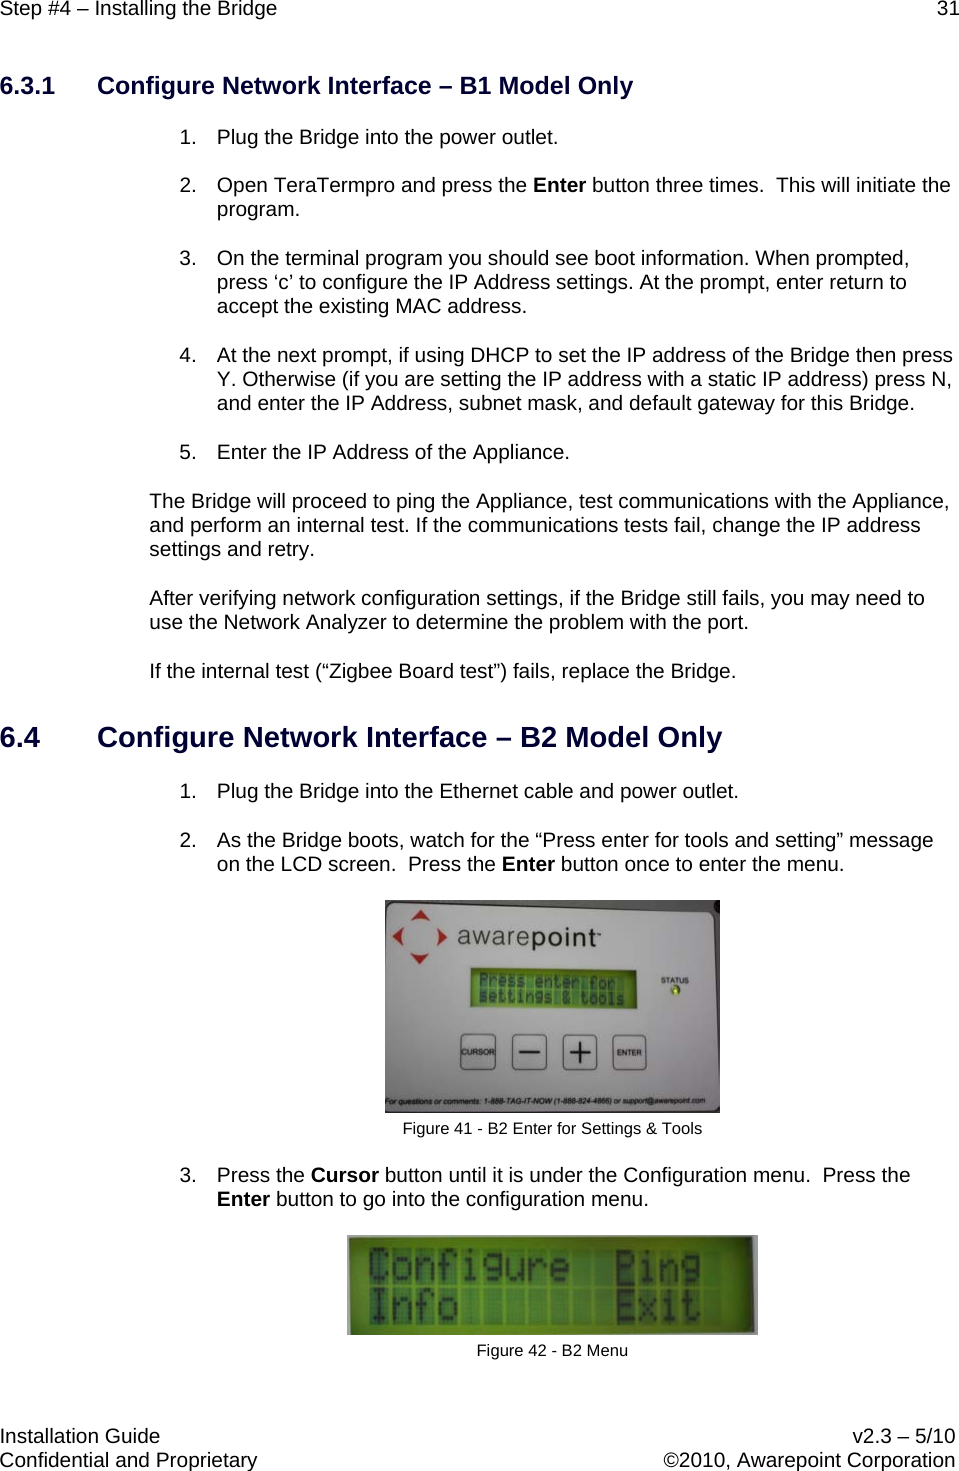 Step #4 – Installing the Bridge    31   Installation Guide    v2.3 – 5/10 Confidential and Proprietary    ©2010, Awarepoint Corporation  6.3.1 Configure Network Interface – B1 Model Only 1. Plug the Bridge into the power outlet.  2. Open TeraTermpro and press the Enter button three times.  This will initiate the program.  3. On the terminal program you should see boot information. When prompted, press ‘c’ to configure the IP Address settings. At the prompt, enter return to accept the existing MAC address. 4. At the next prompt, if using DHCP to set the IP address of the Bridge then press Y. Otherwise (if you are setting the IP address with a static IP address) press N, and enter the IP Address, subnet mask, and default gateway for this Bridge. 5.  Enter the IP Address of the Appliance. The Bridge will proceed to ping the Appliance, test communications with the Appliance, and perform an internal test. If the communications tests fail, change the IP address settings and retry.  After verifying network configuration settings, if the Bridge still fails, you may need to use the Network Analyzer to determine the problem with the port. If the internal test (“Zigbee Board test”) fails, replace the Bridge. 6.4 Configure Network Interface – B2 Model Only 1. Plug the Bridge into the Ethernet cable and power outlet. 2. As the Bridge boots, watch for the “Press enter for tools and setting” message on the LCD screen.  Press the Enter button once to enter the menu.  Figure 41 - B2 Enter for Settings &amp; Tools 3. Press the Cursor button until it is under the Configuration menu.  Press the Enter button to go into the configuration menu.    Figure 42 - B2 Menu 